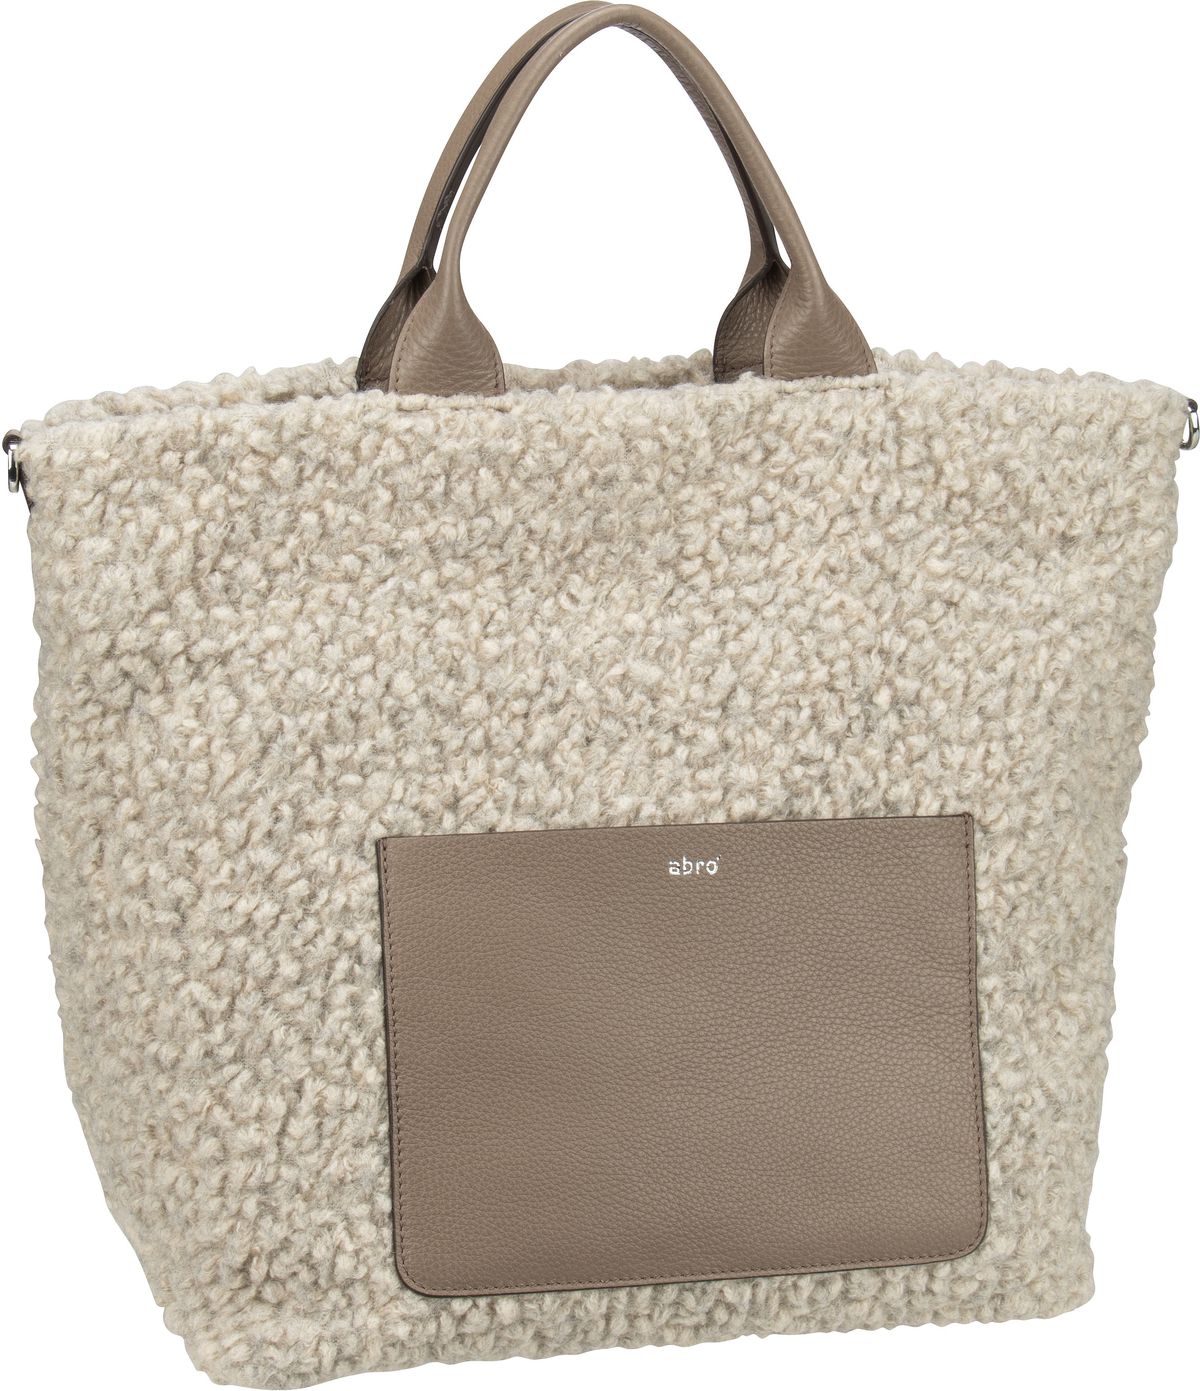 abro Raquel Faux Shearling 30004  in Tope (32.6 Liter), Handtasche